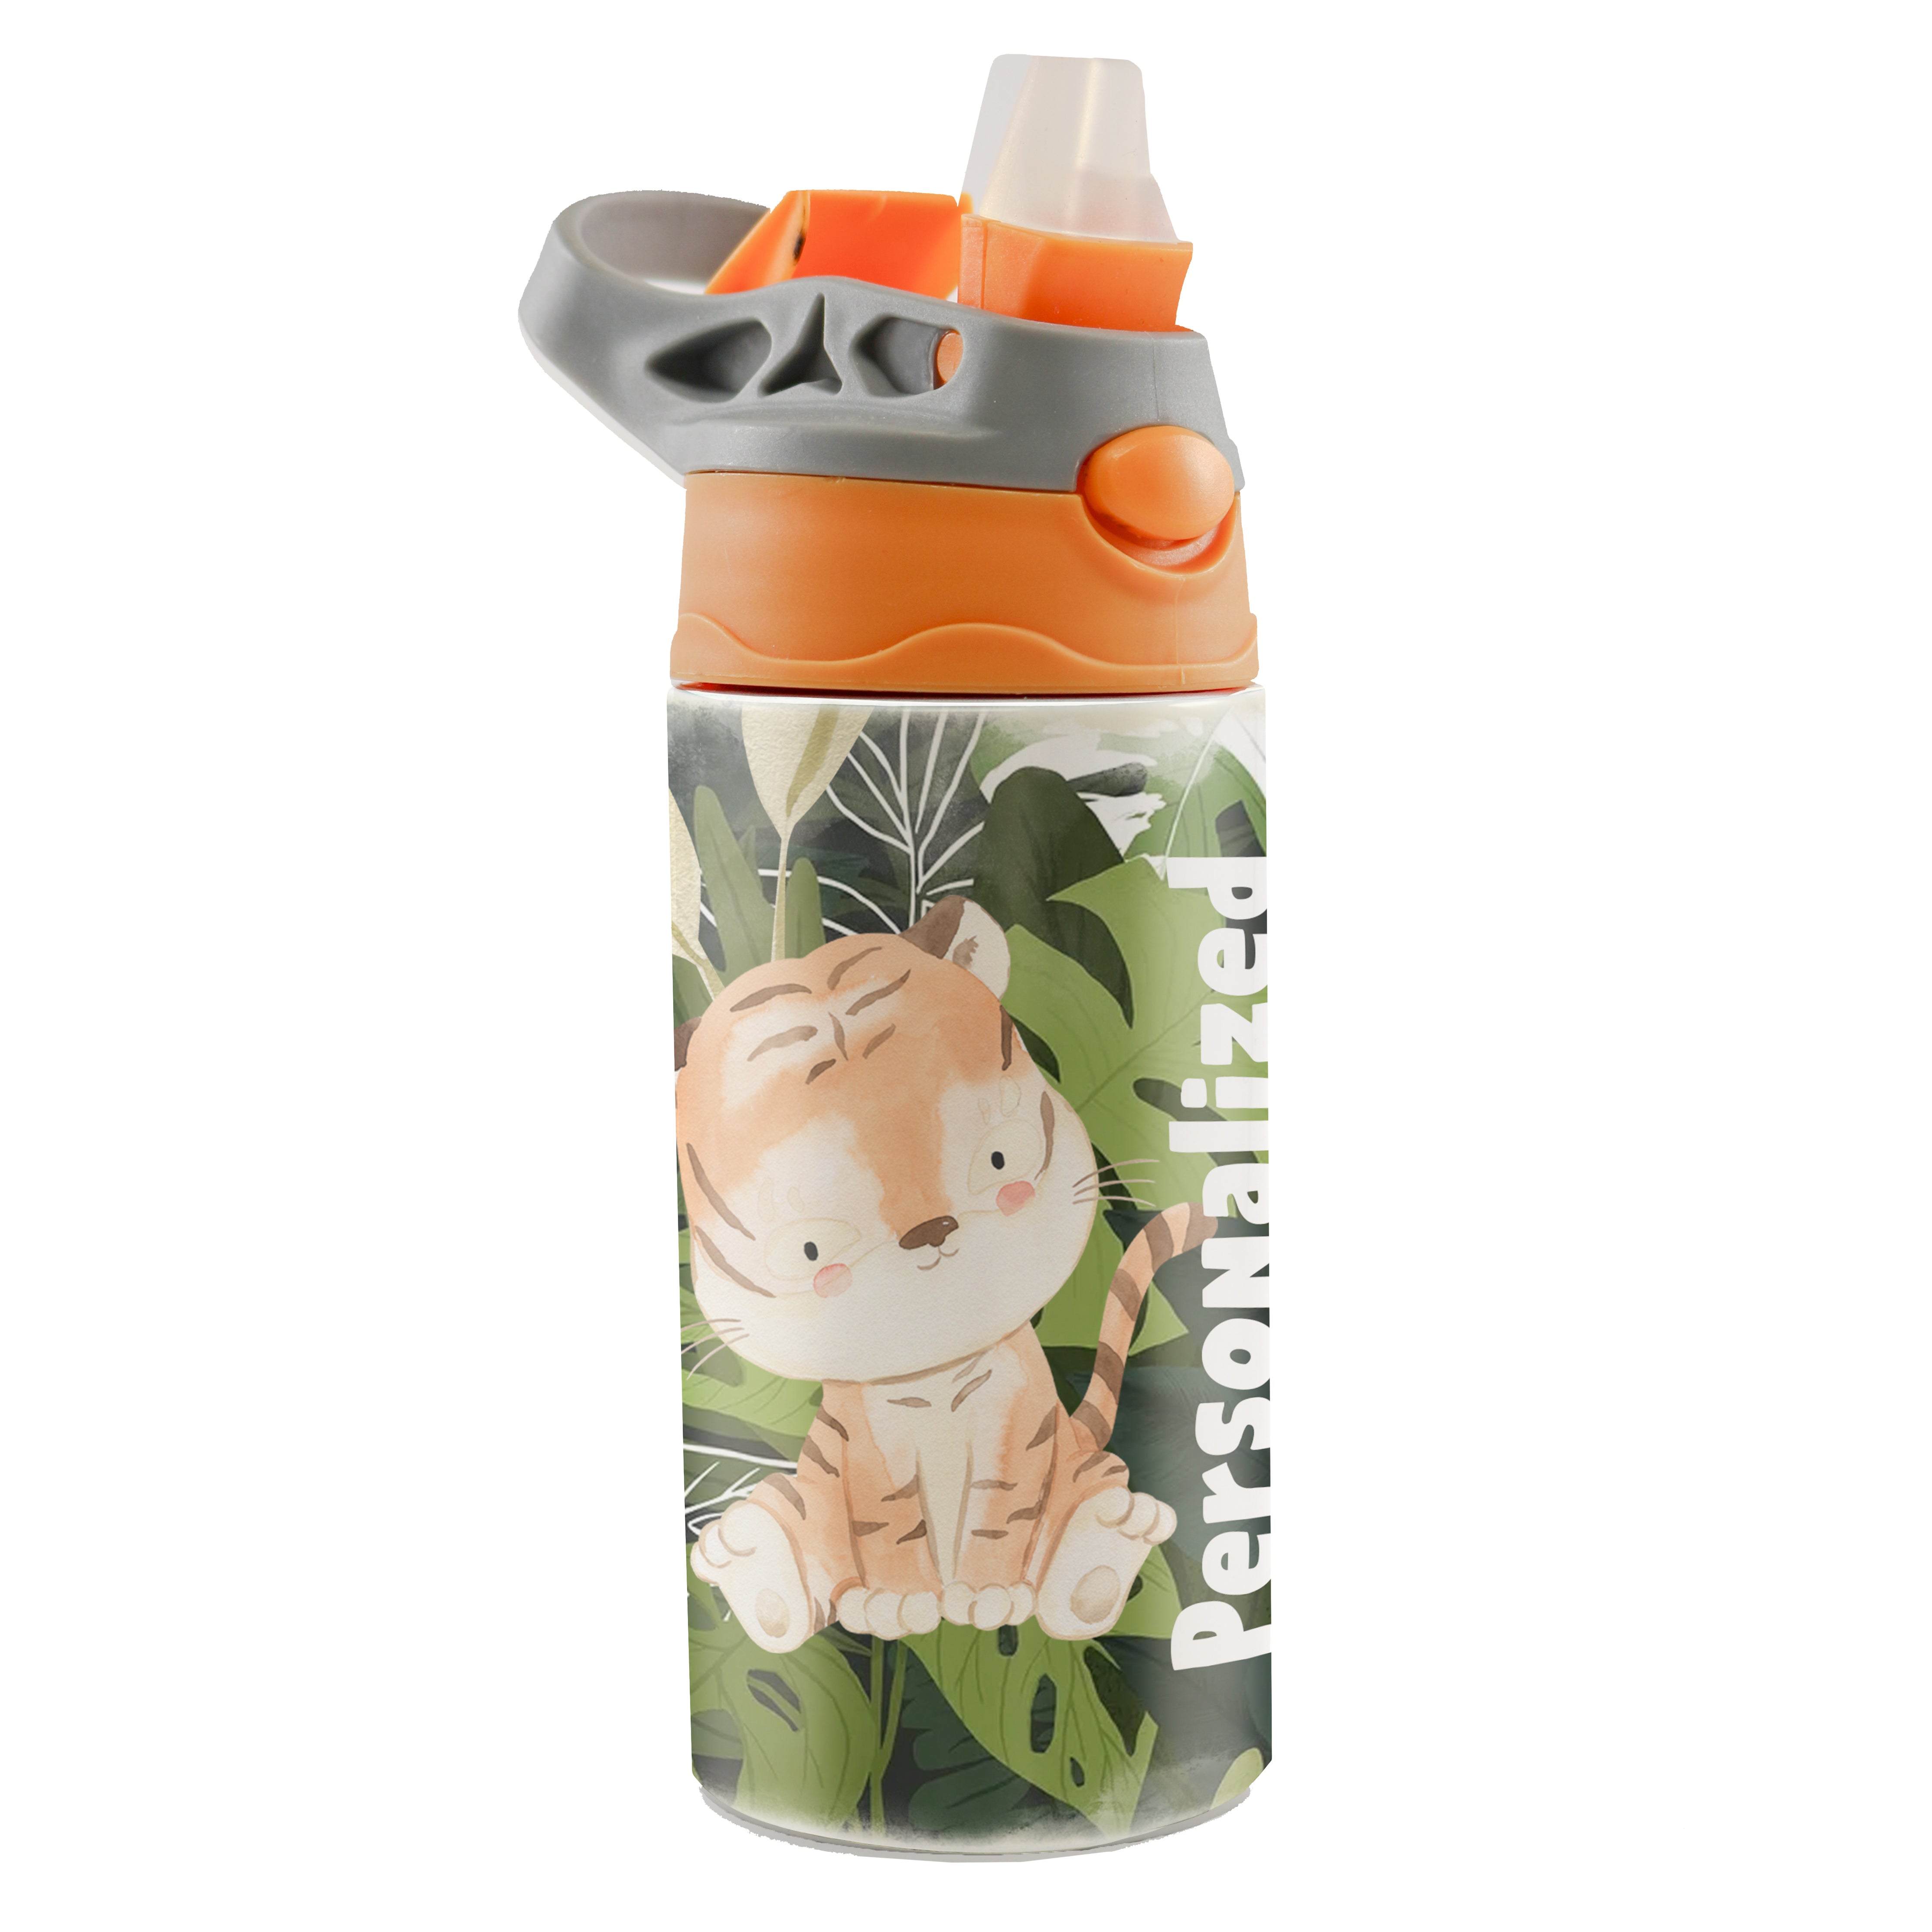 Trend Setters Original (Tiger Jungle - Personalize with Name) 12 oz Stainless Steel Water Bottle with Orange and Grey Lid